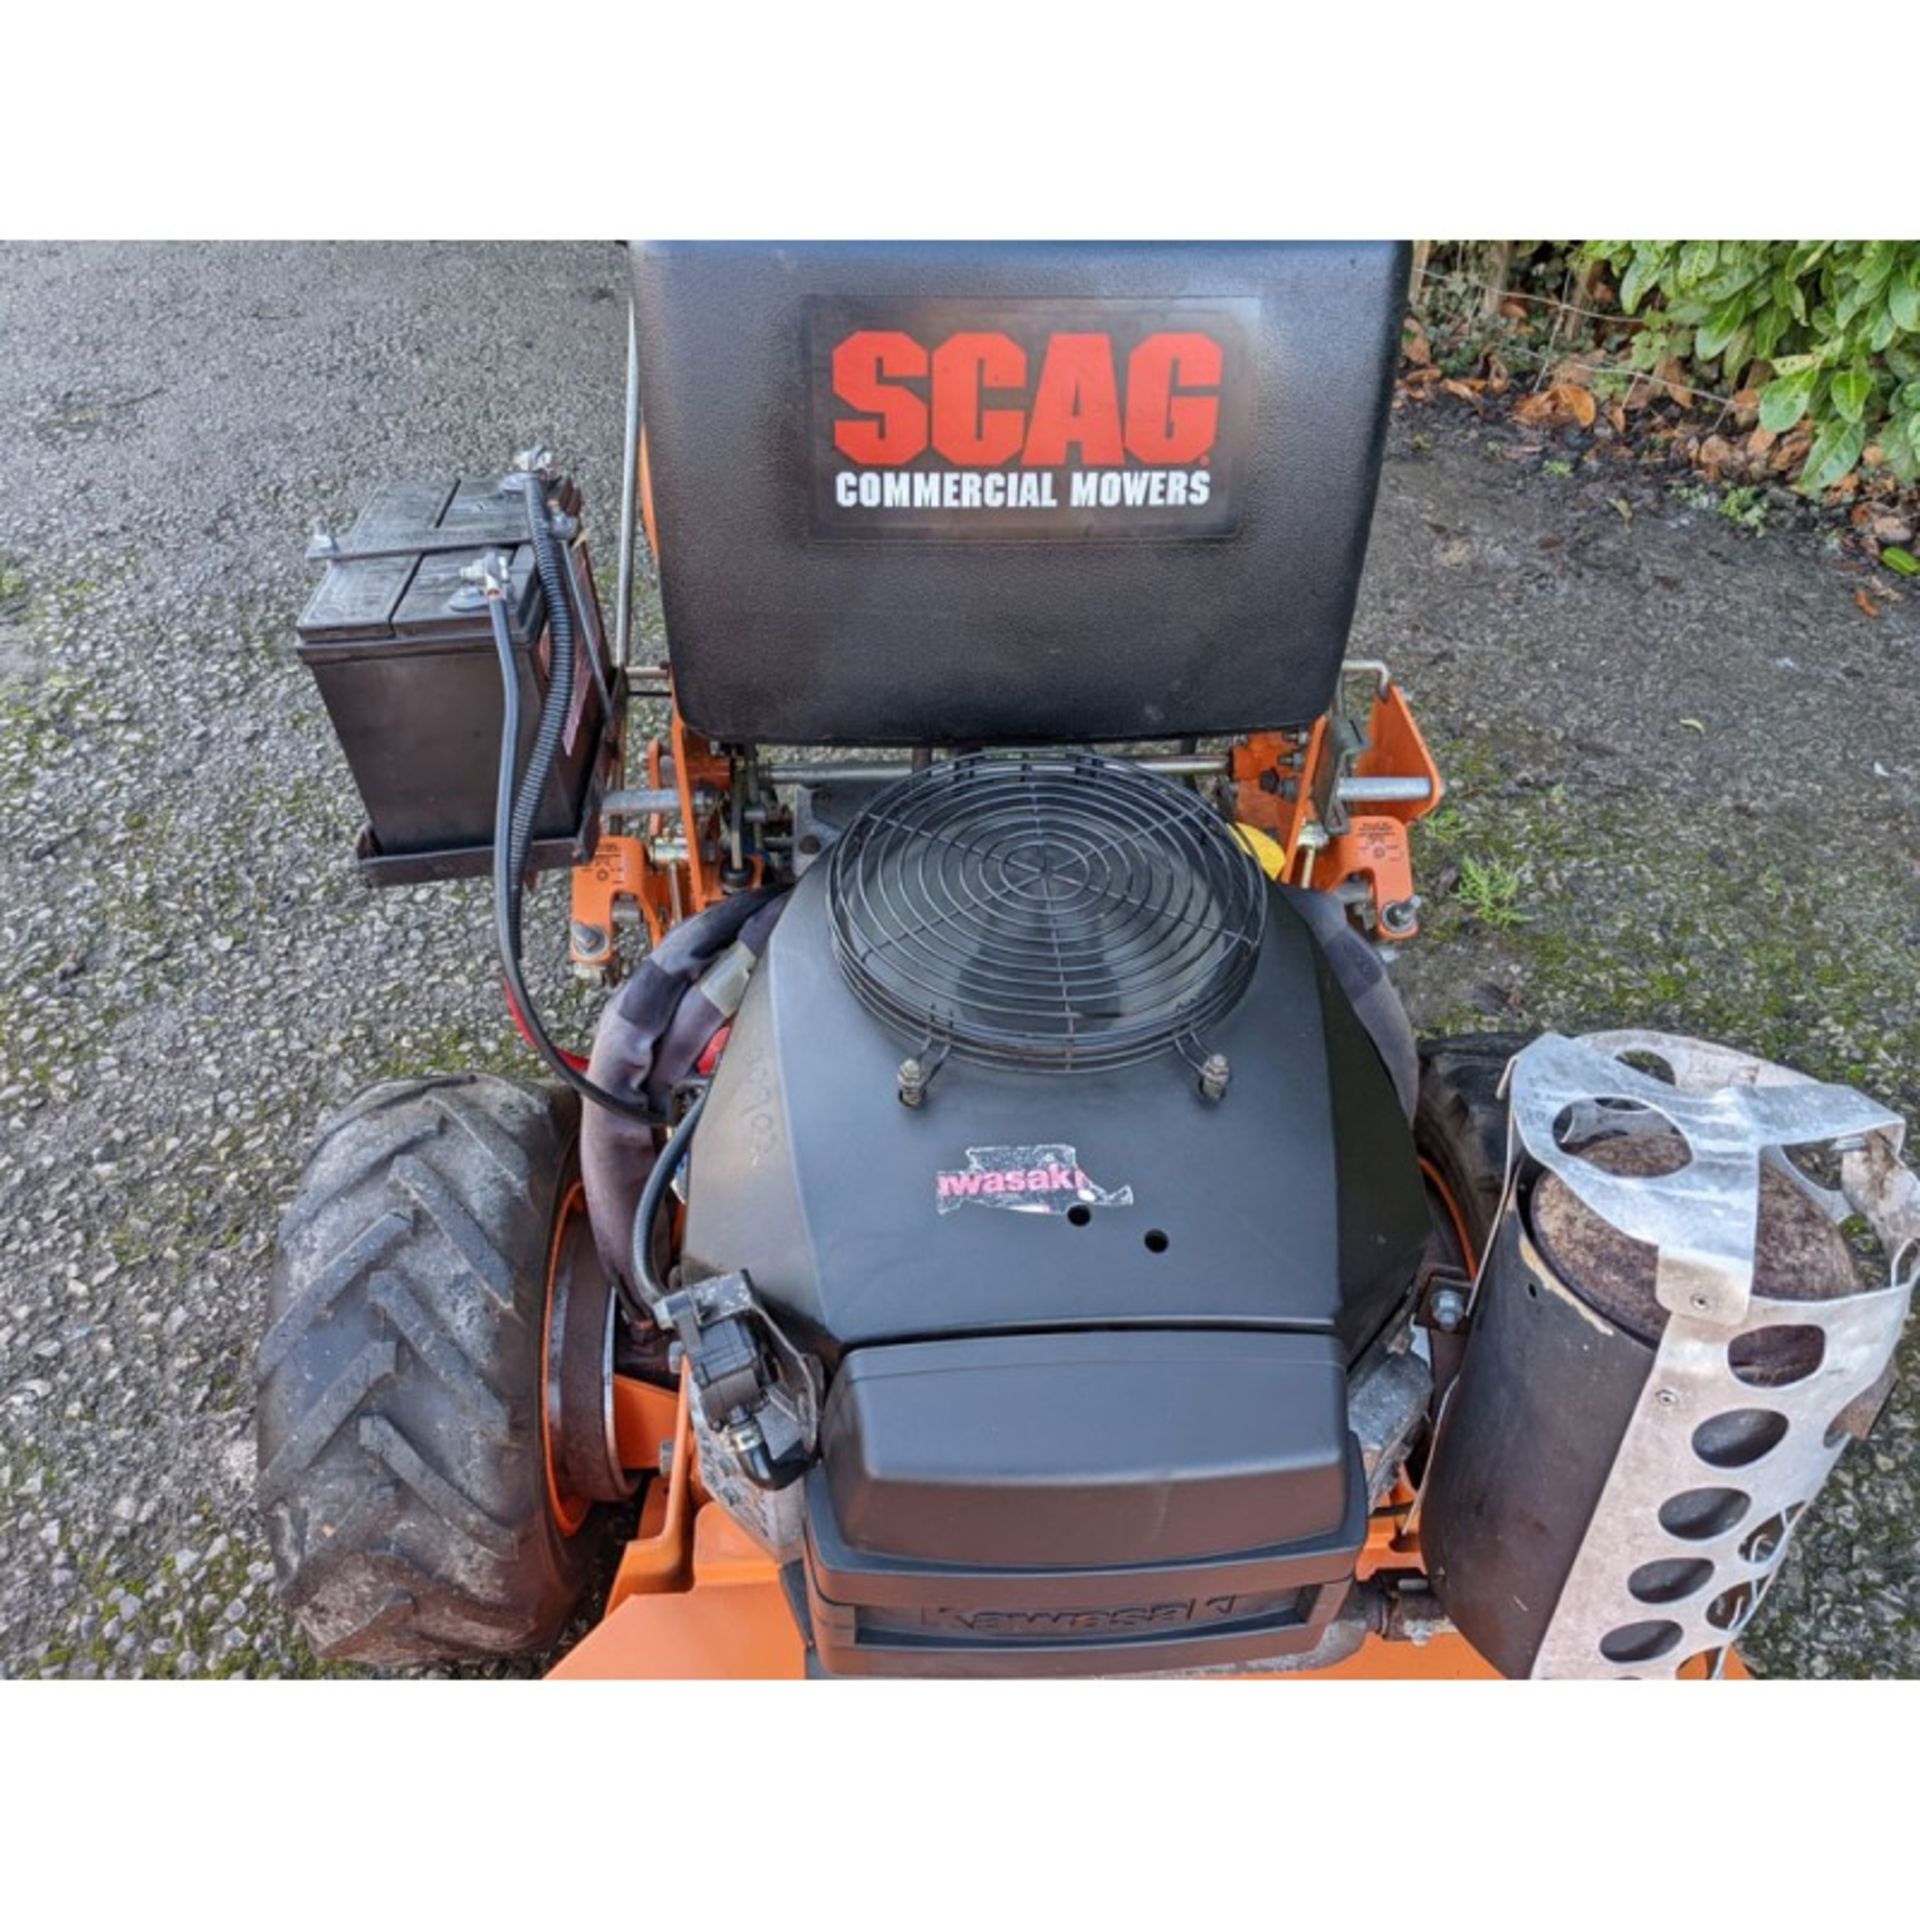 2012 Scag SWZ36A-481FS 36" Commercial Walk Behind Zero Turn Rotary Mower - Image 2 of 6